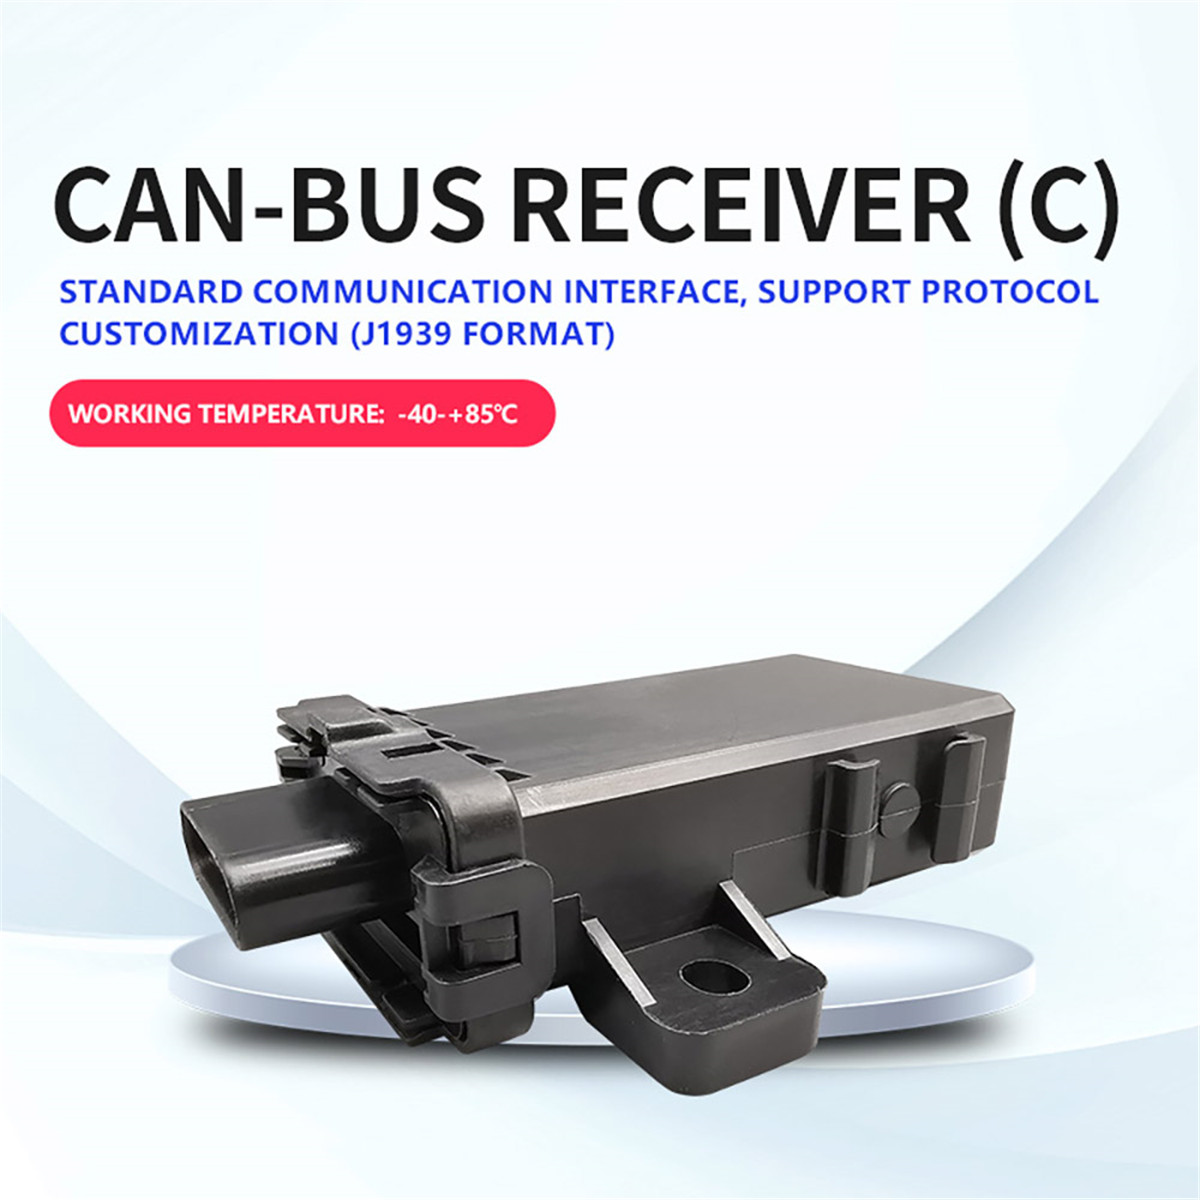 I-CAN-Bus receiver01 (9)